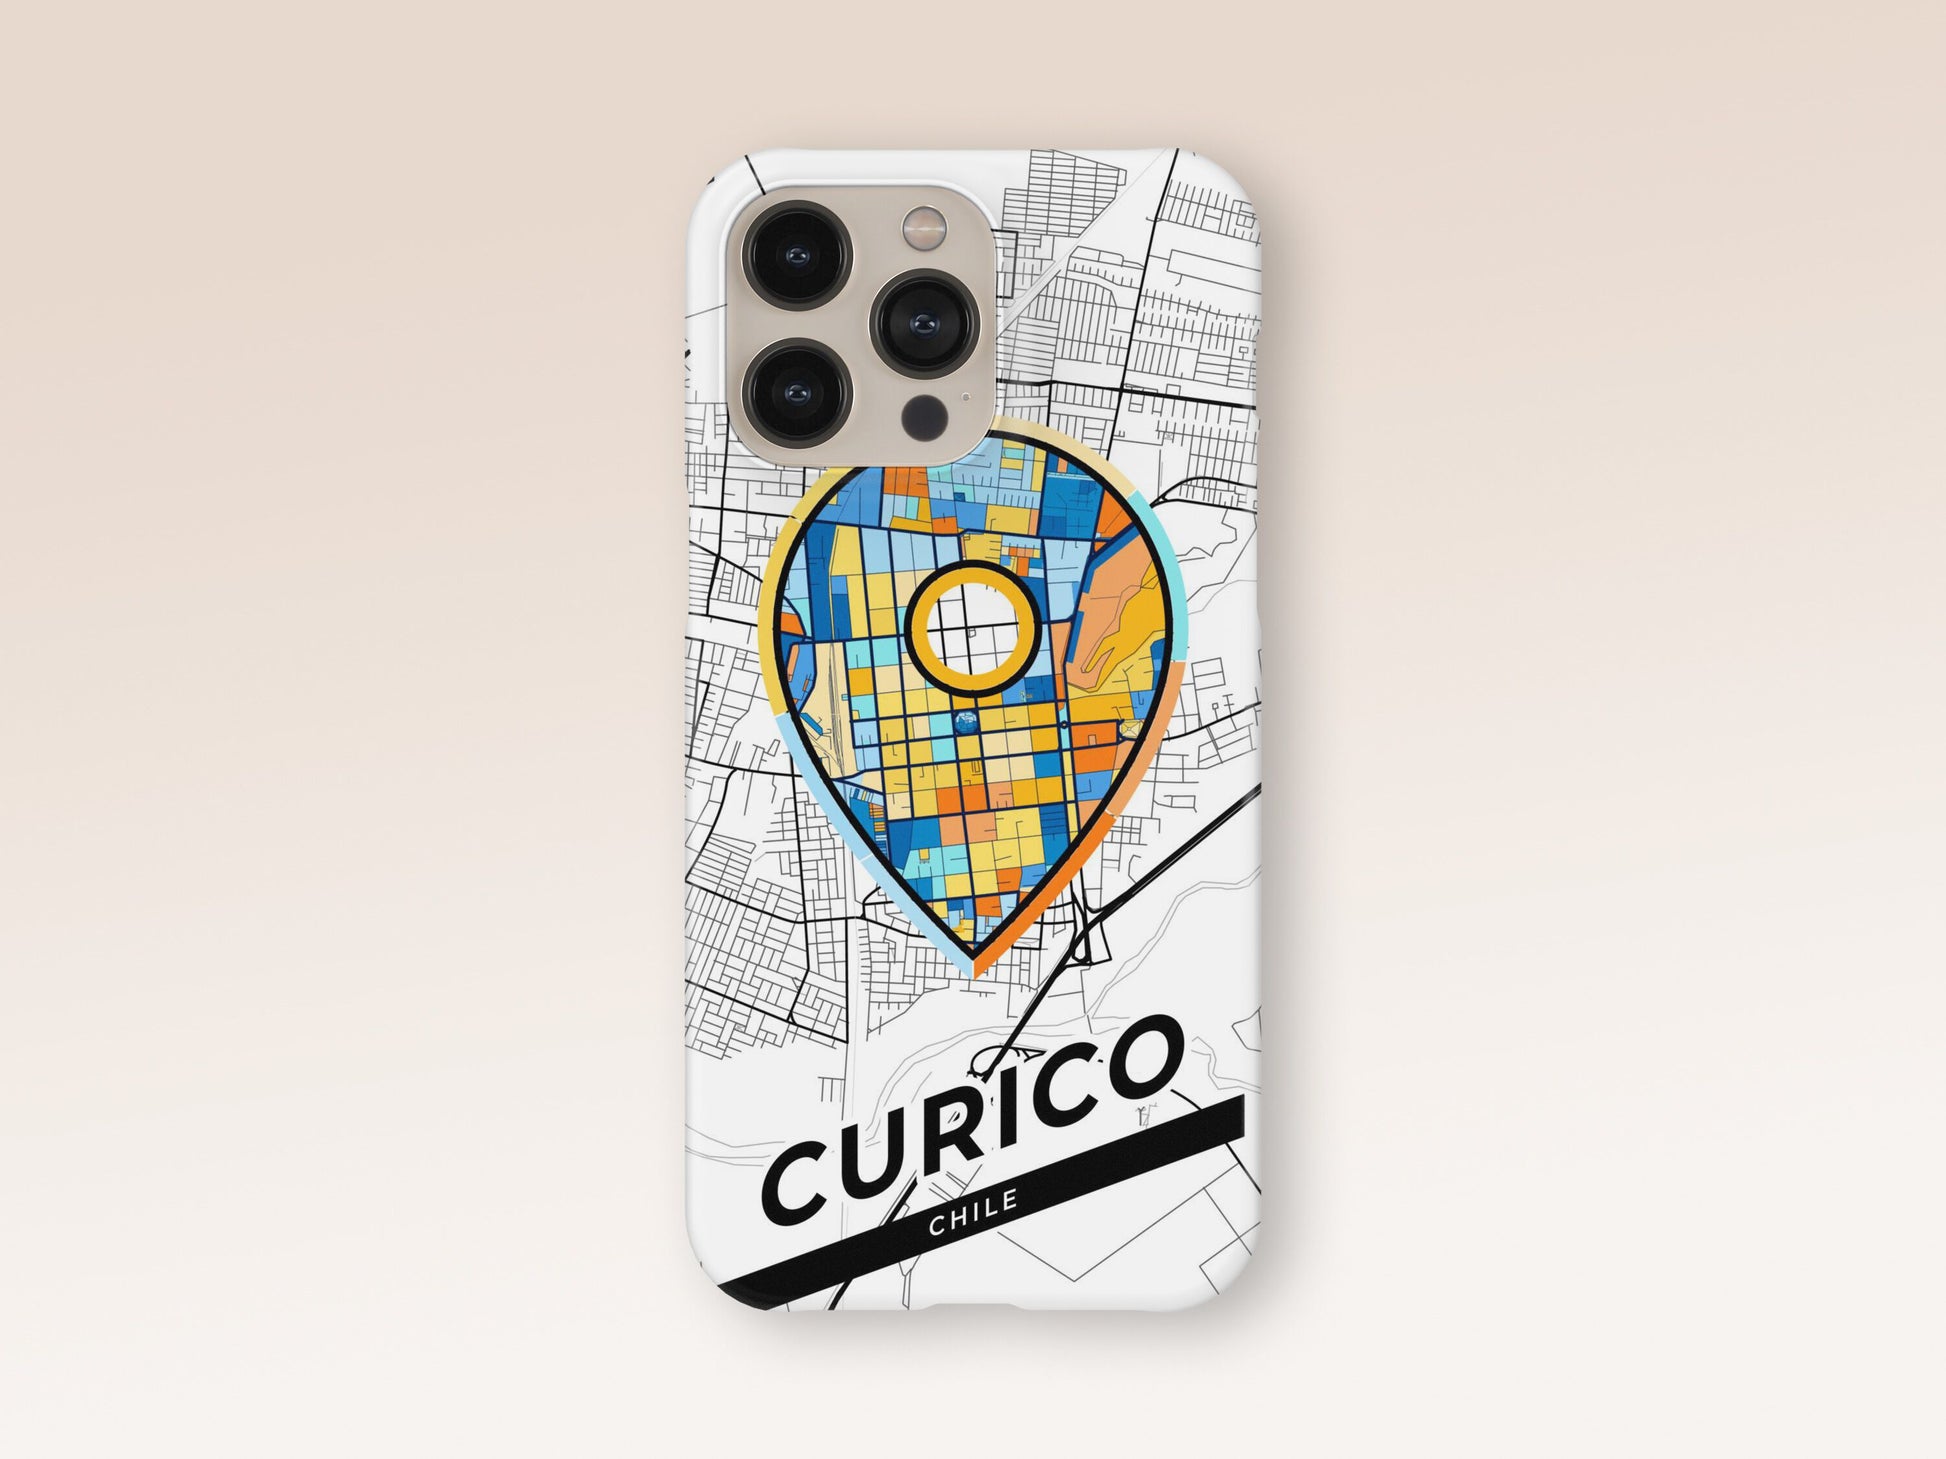 Curico Chile slim phone case with colorful icon. Birthday, wedding or housewarming gift. Couple match cases. 1